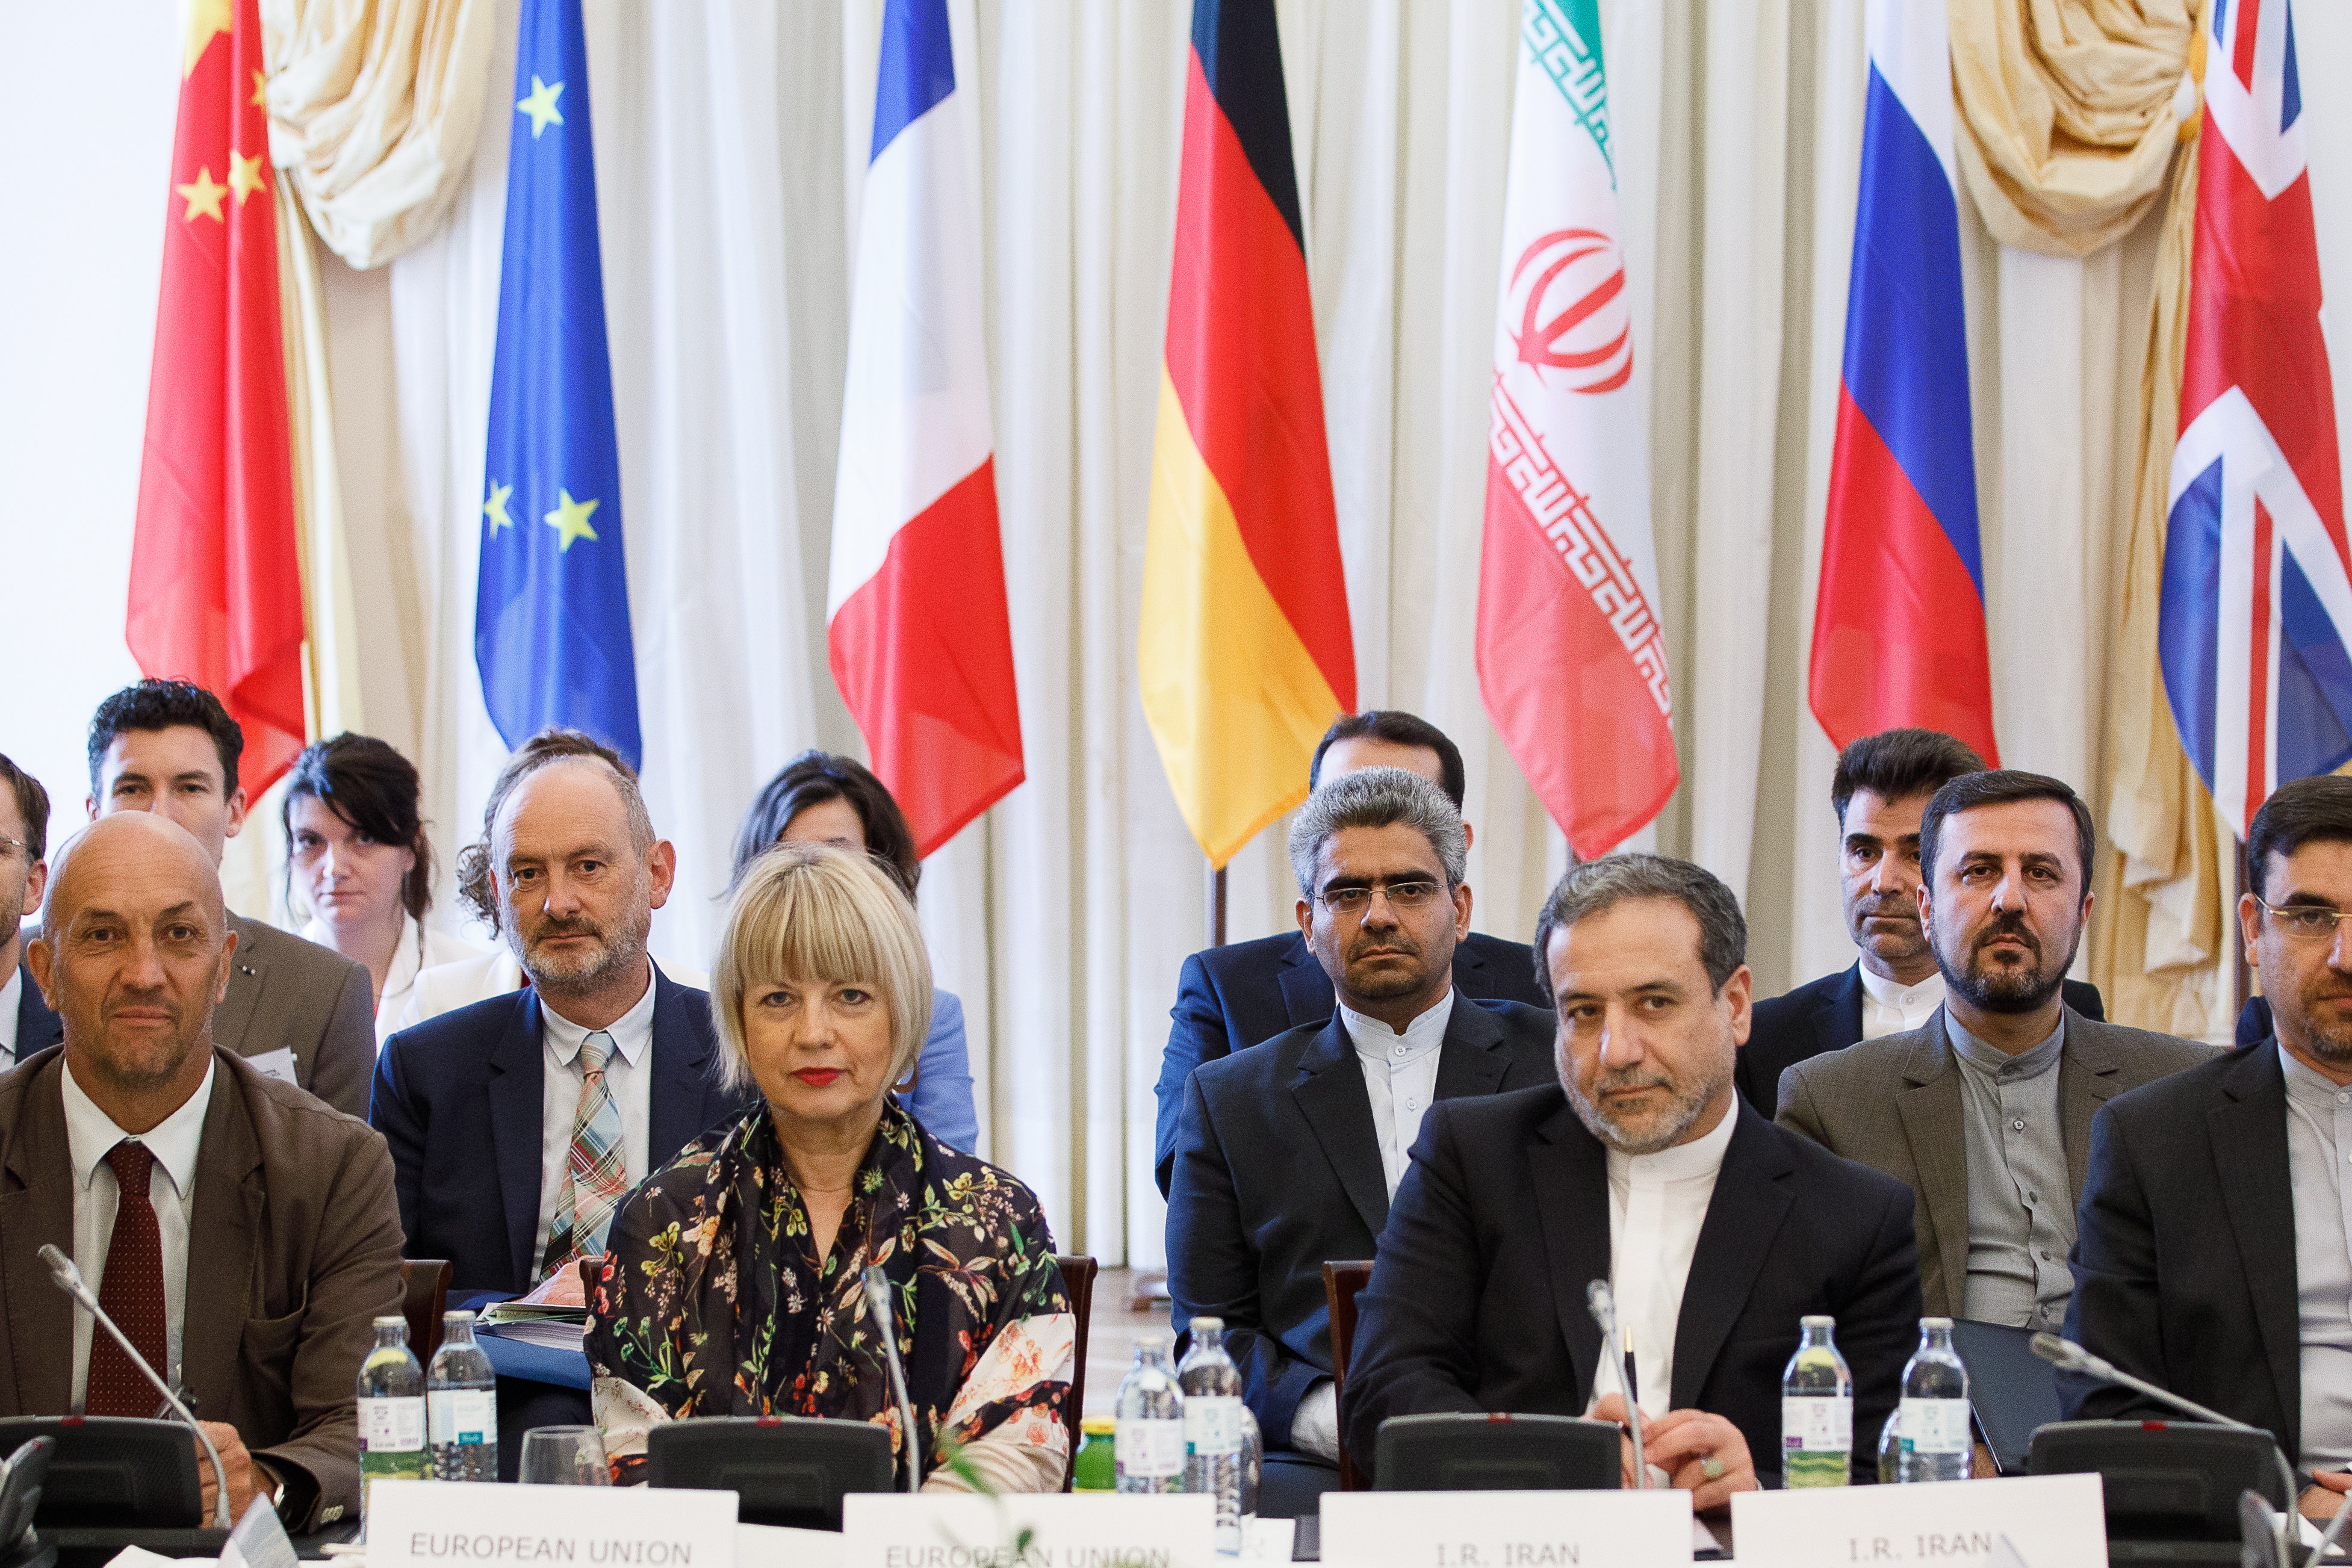 epa07745544 EU director Helga Schmid (L) and Iranian Deputy-Foreign Ministers Abbas Araghchi (R) attend an extraordinary JCPOA Joint Commission meeting at the Palais Coburg, in Vienna, Austria, 28 July 2019. The JCPOA Joint Commission meeting at a Political Directors' level is chaired on behalf of European Union High Representative Federica Mogherini by European External Action Service (EEAS) Secretary General Helga Maria Schmid and is attended by E3/EU+2 (Germany, France, the United Kingdom, China, Russia) and Iran.  EPA/FLORIAN WIESER